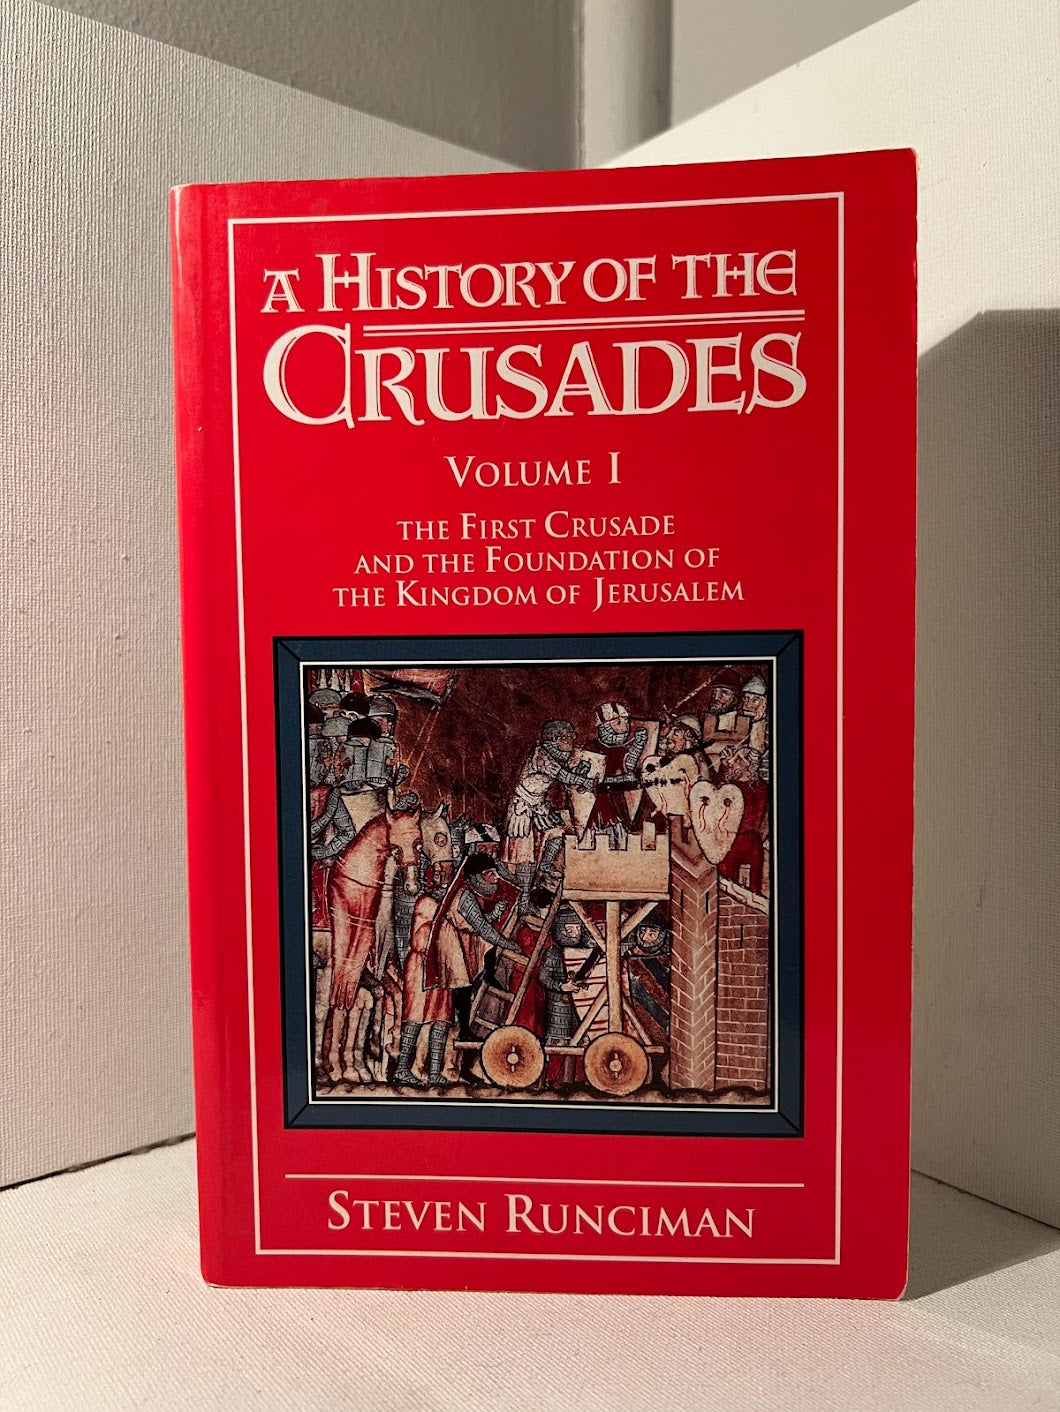 A History of the Crusades (3 vol.) by Steven Runicman